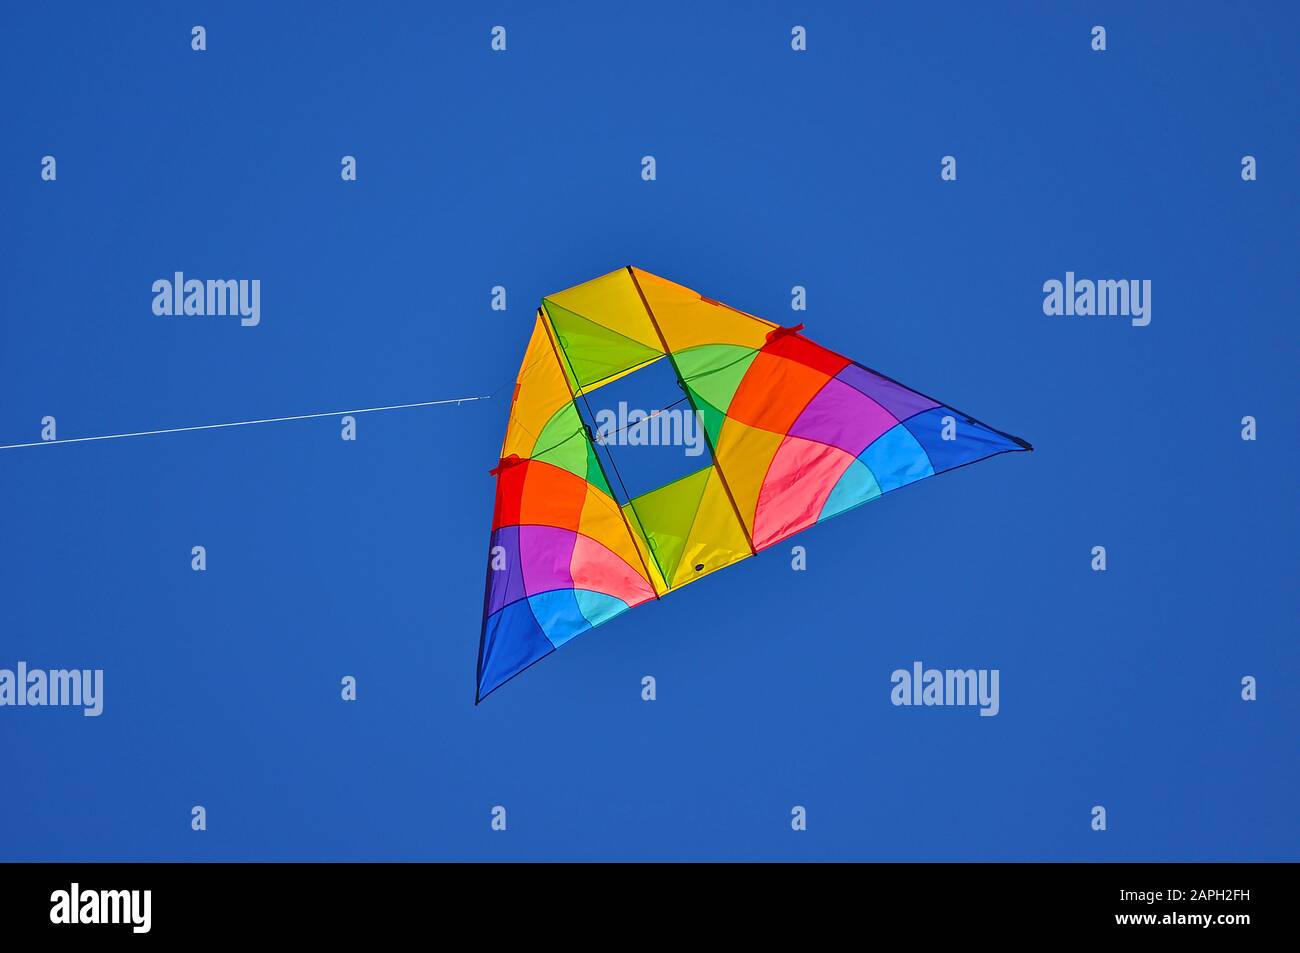 Two colorful kites flying in the blue sky Stock Photo